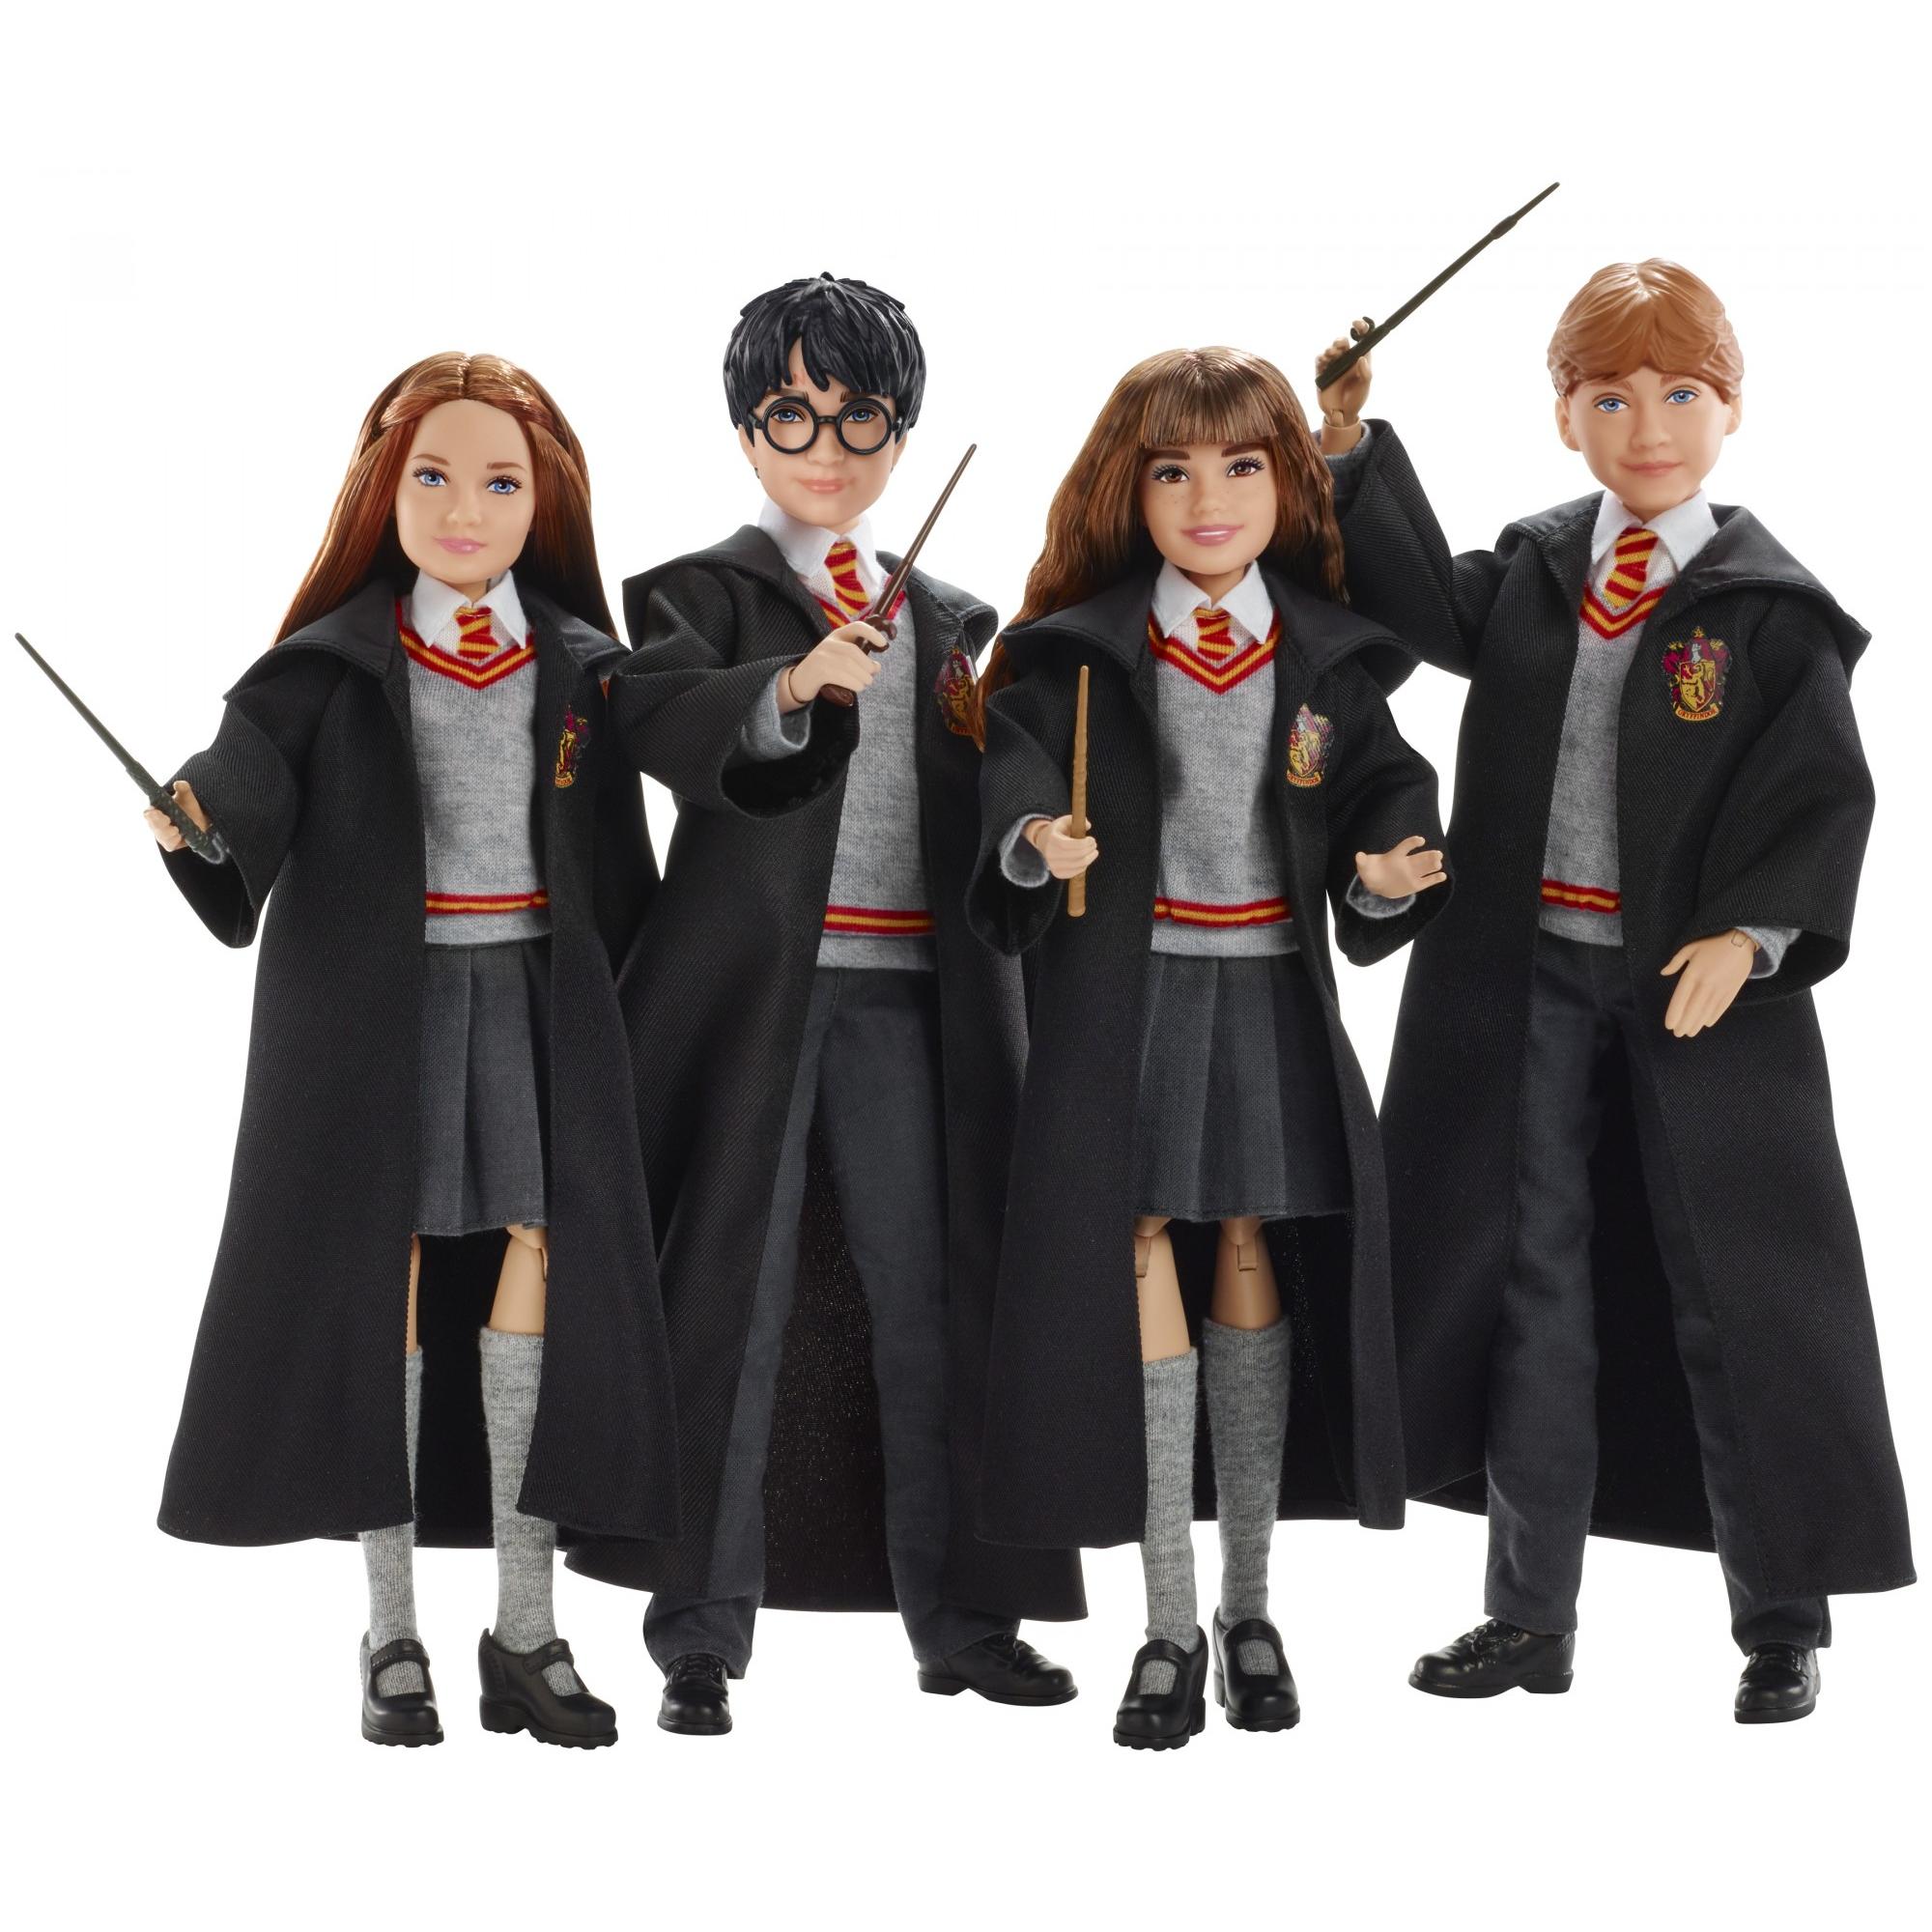 Persona Kirurgi skillevæg Where Can You Buy the New Harry Potter Barbie Dolls?